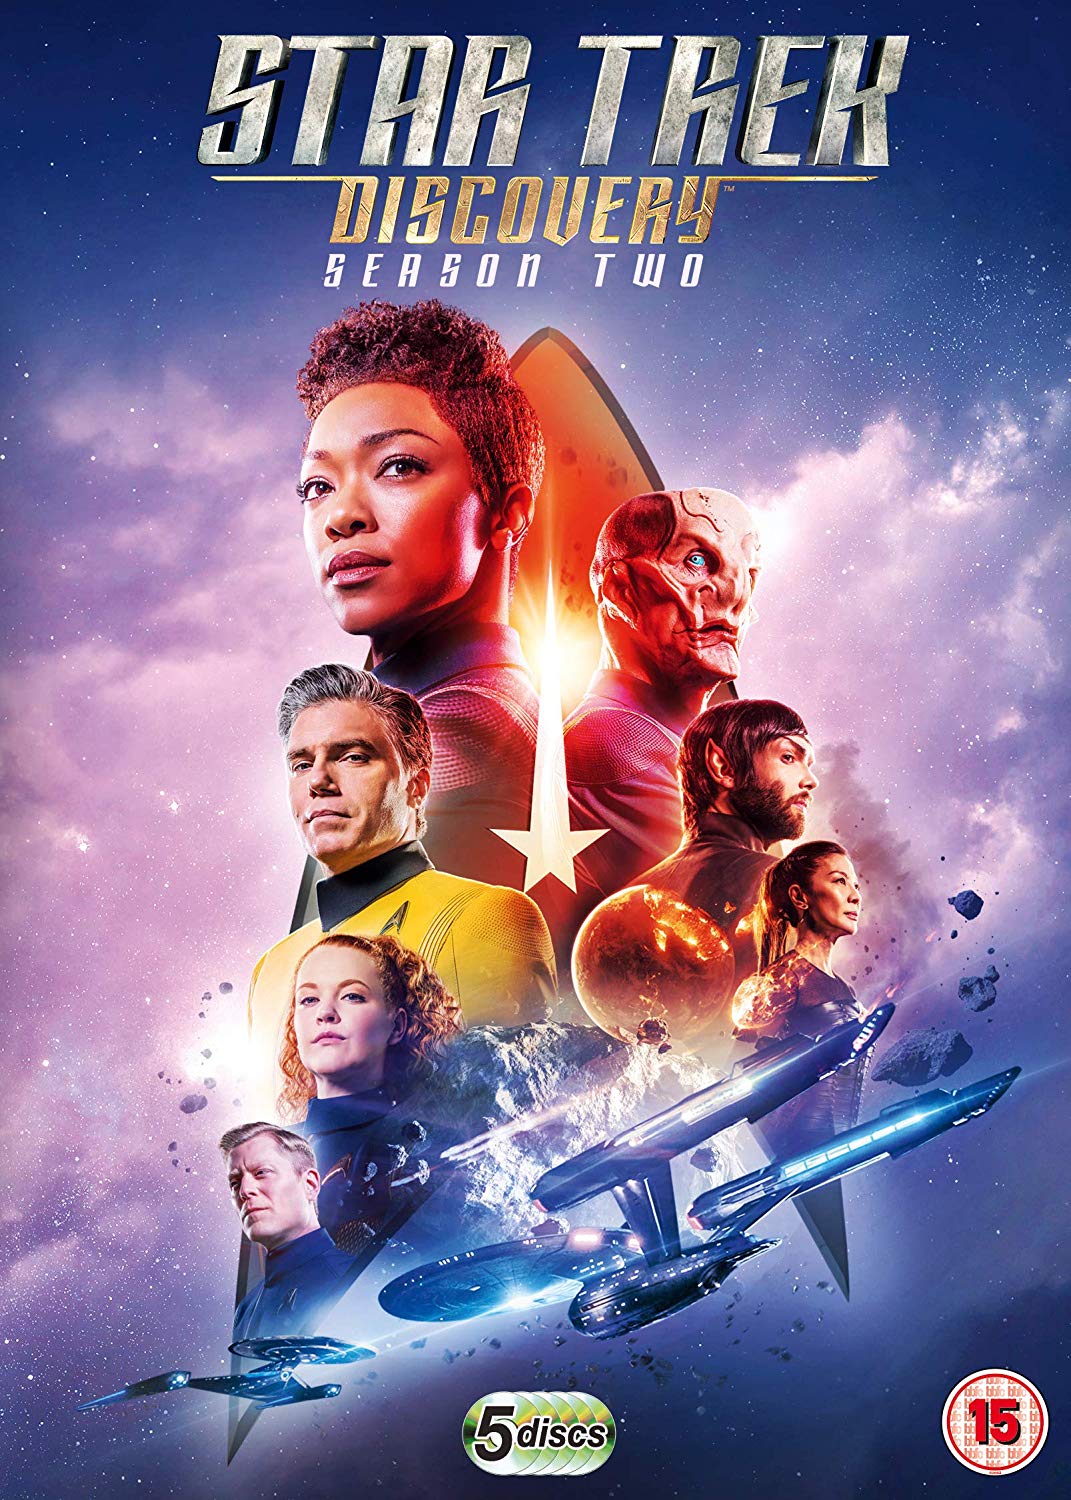 boom competitions - Star trek discovery season 2